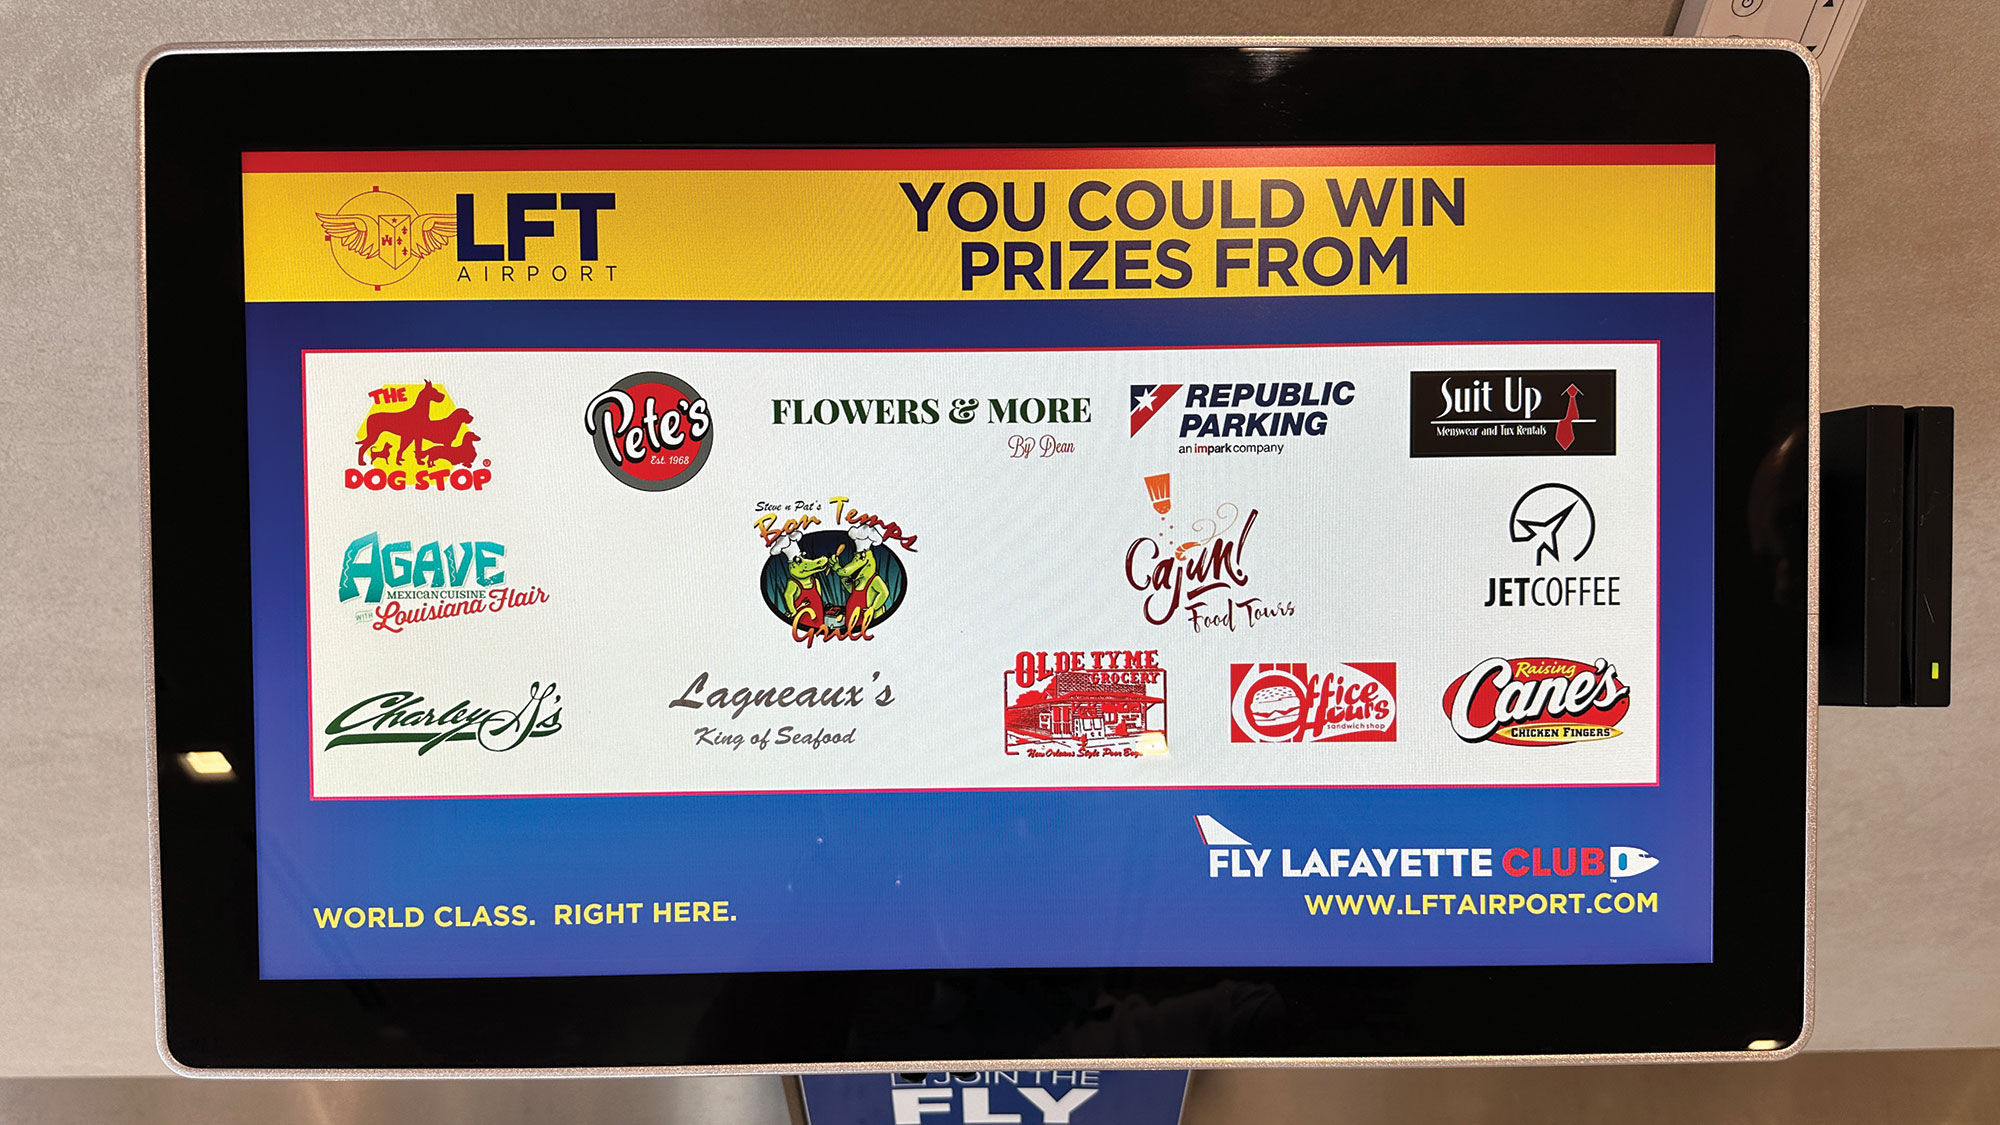 At Lafayette Regional Airport in Louisiana, Fly Lafayette Club members scan their ID at special kiosks to be entered into monthly prize drawings.